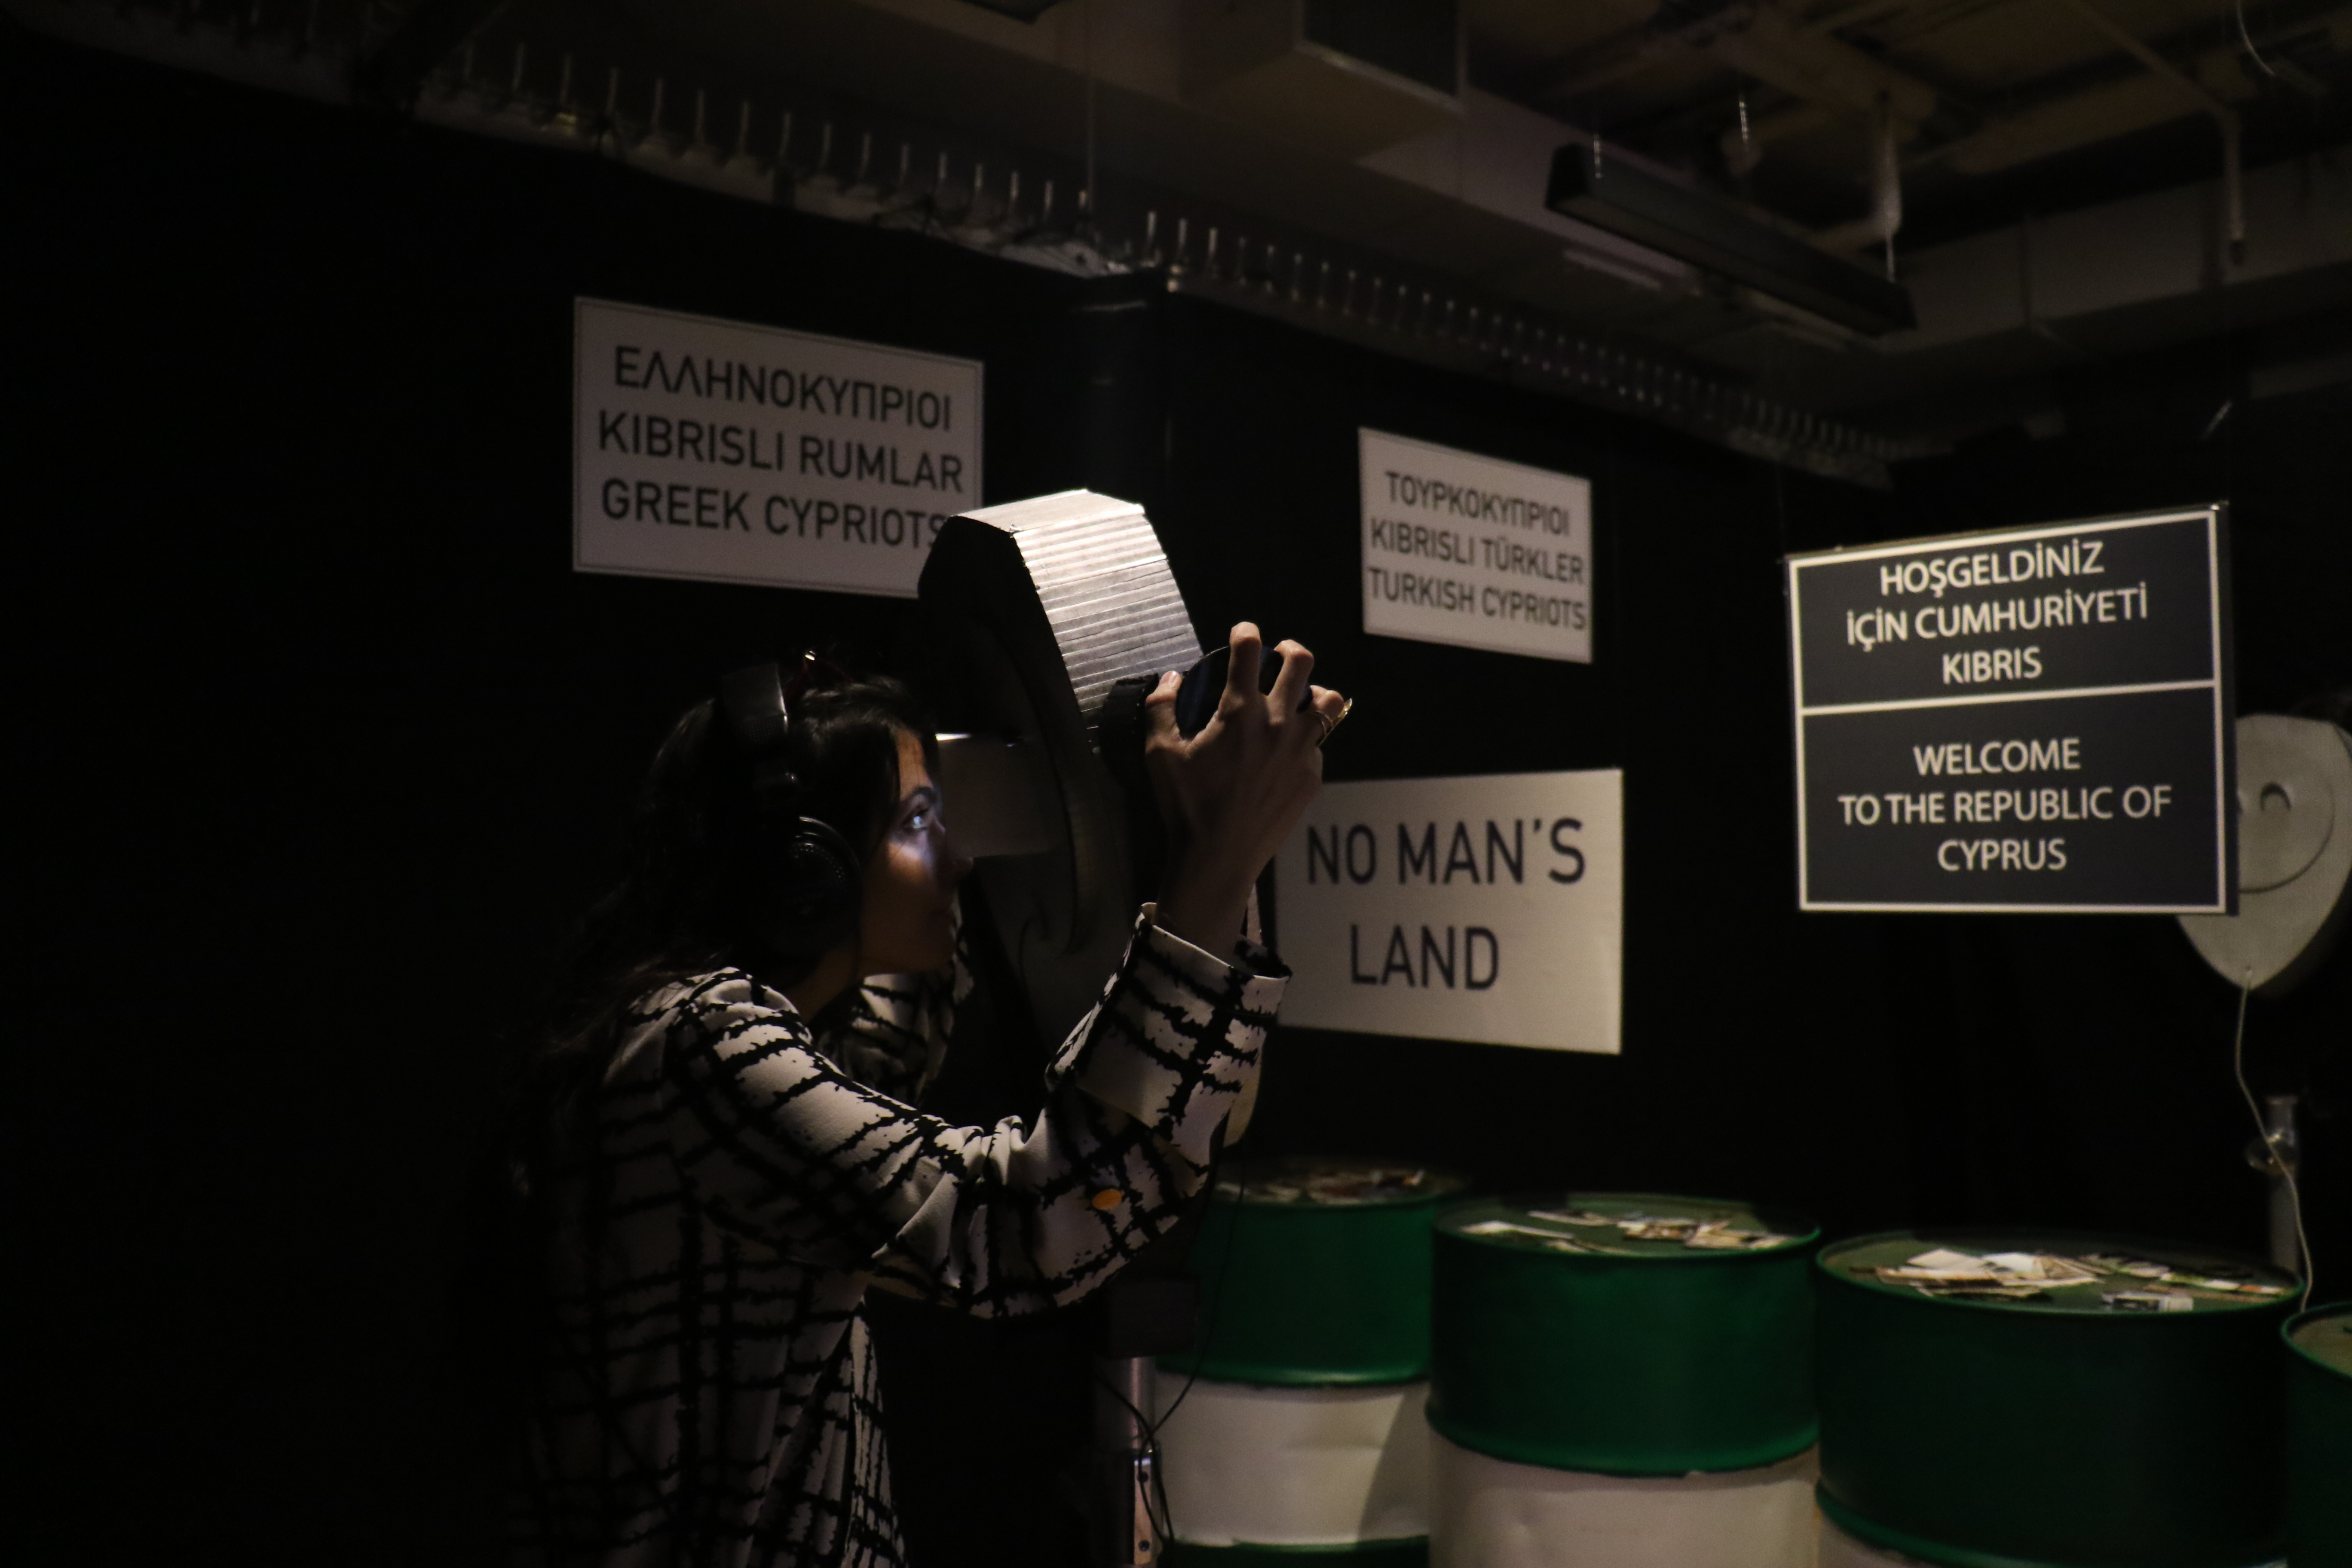 A 360 Video installation that simulates the division of Cyprus, and shows the perspectives of the two communities - The Greek and Turkish Cypriots.